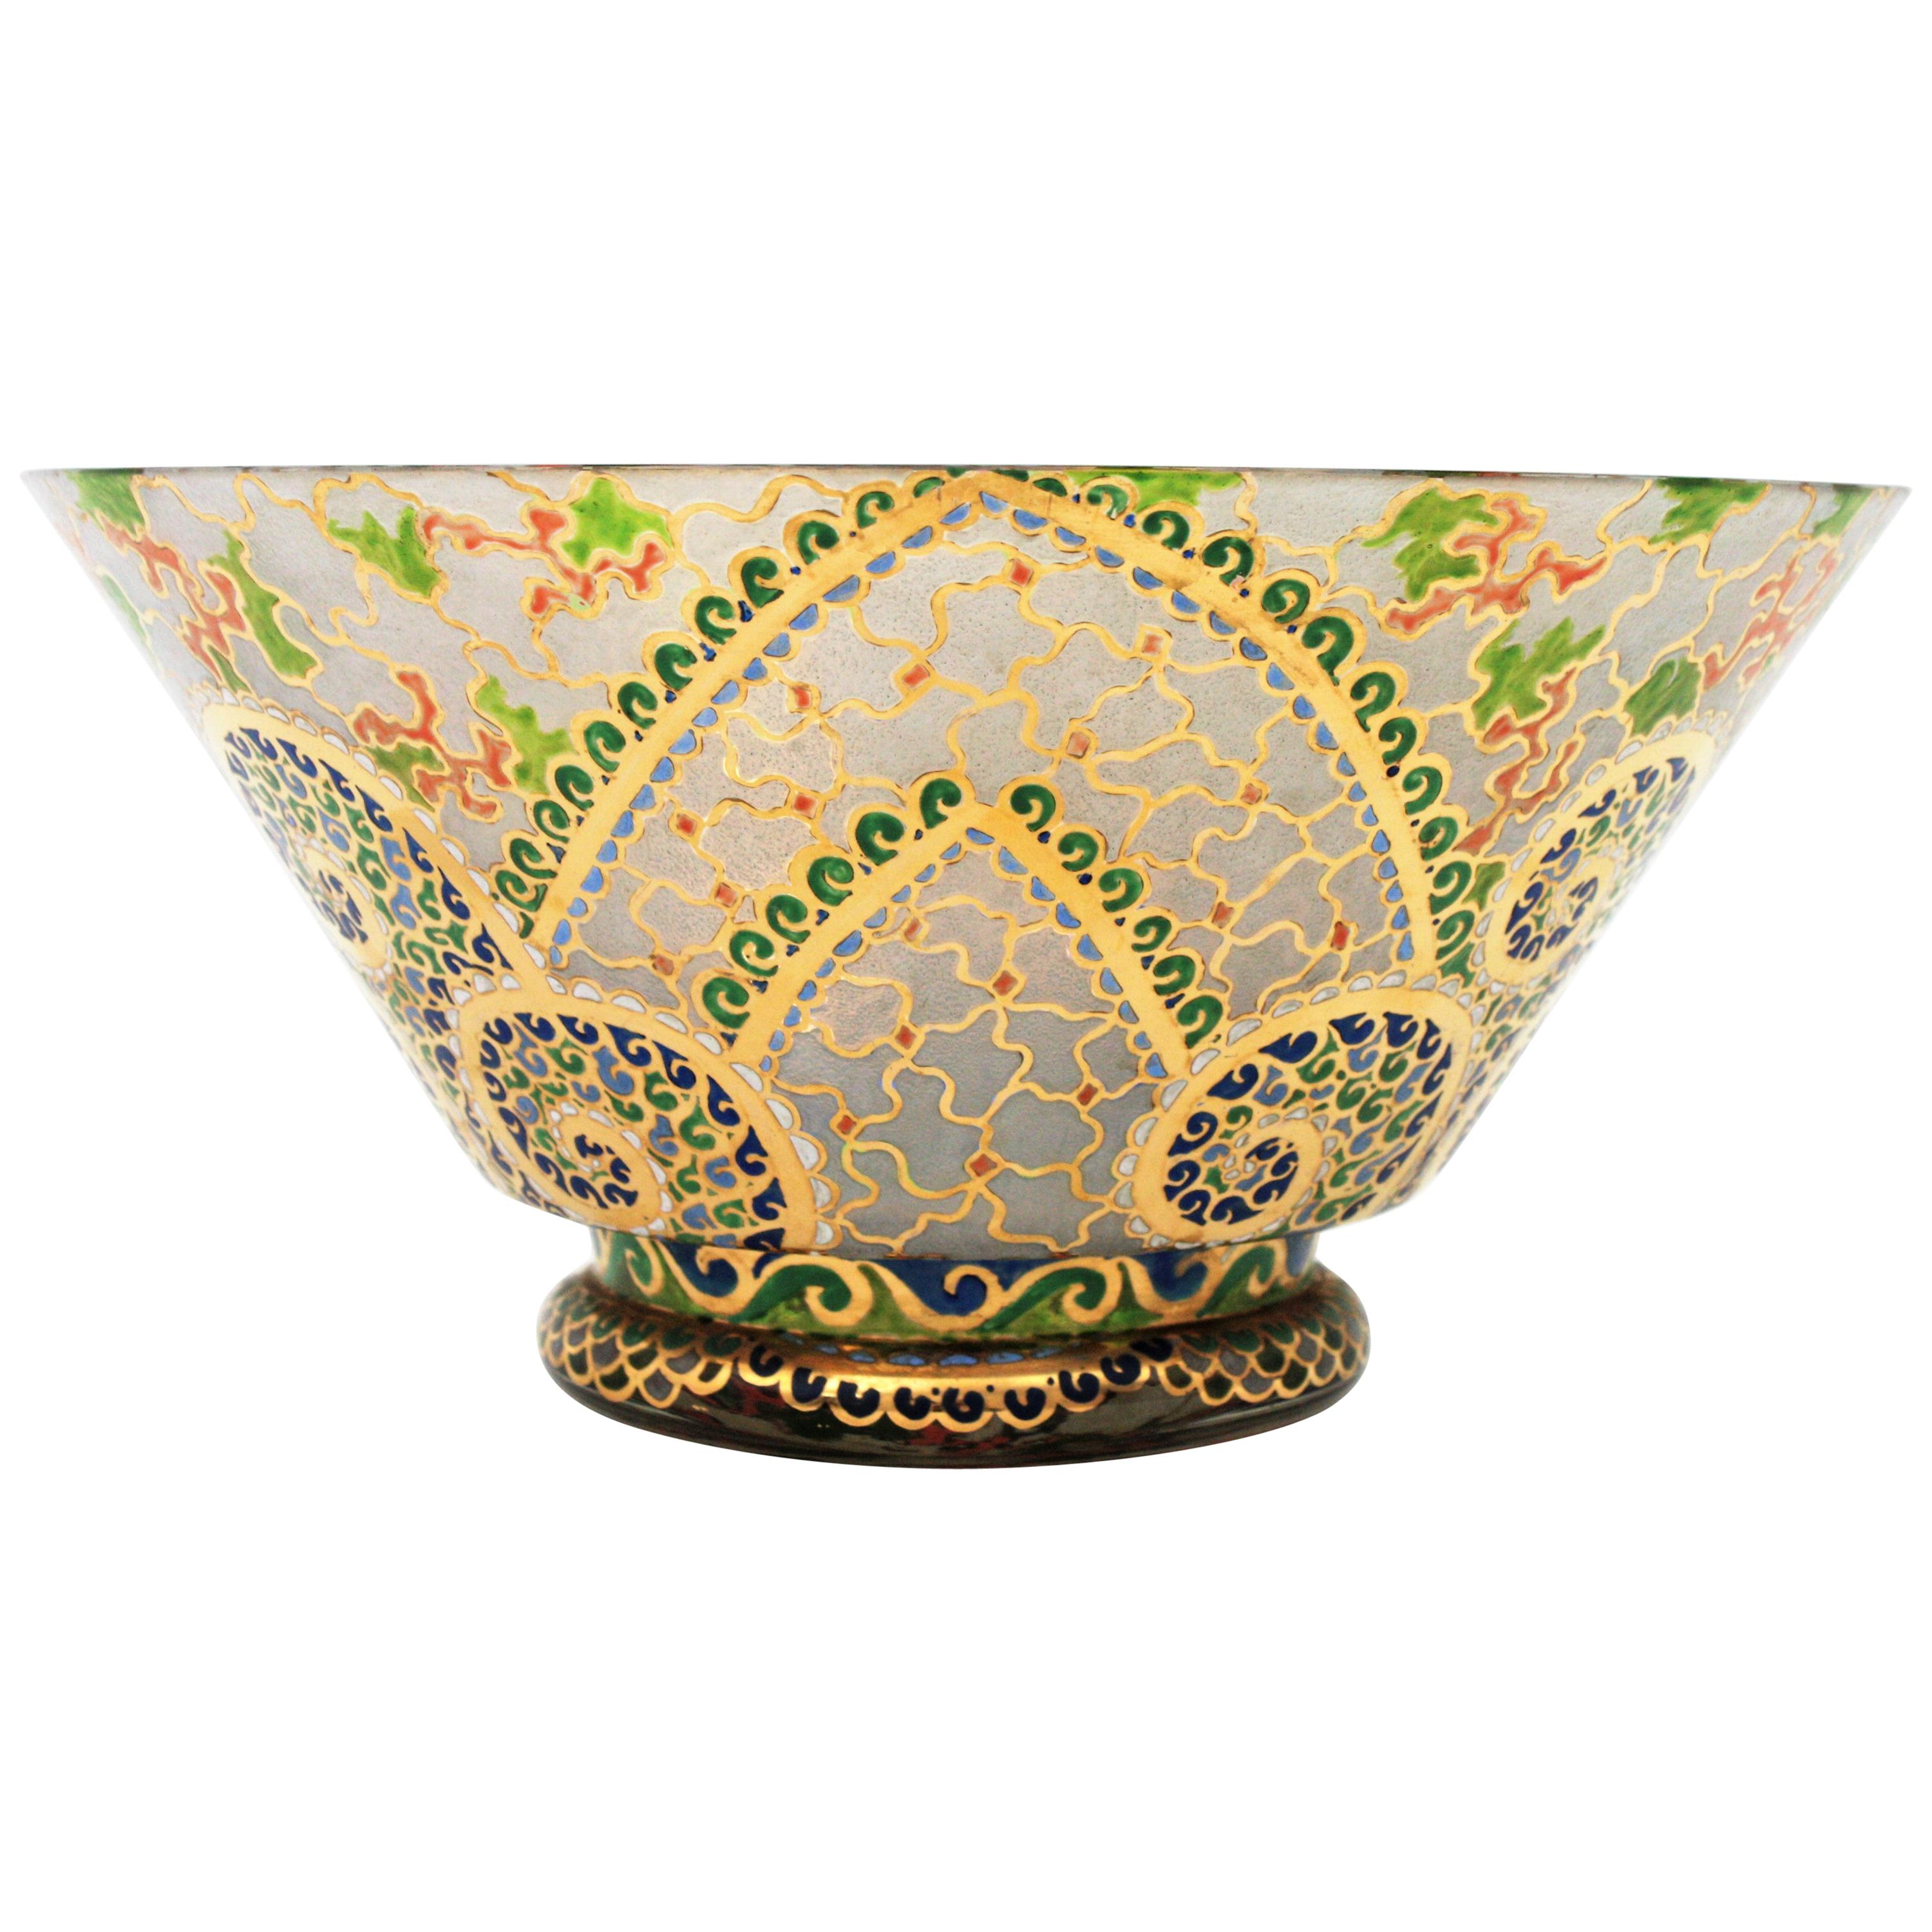 Art Deco Hand Painted Enameled Polychrome & Gold Glass Centerpiece Bowl by Riera